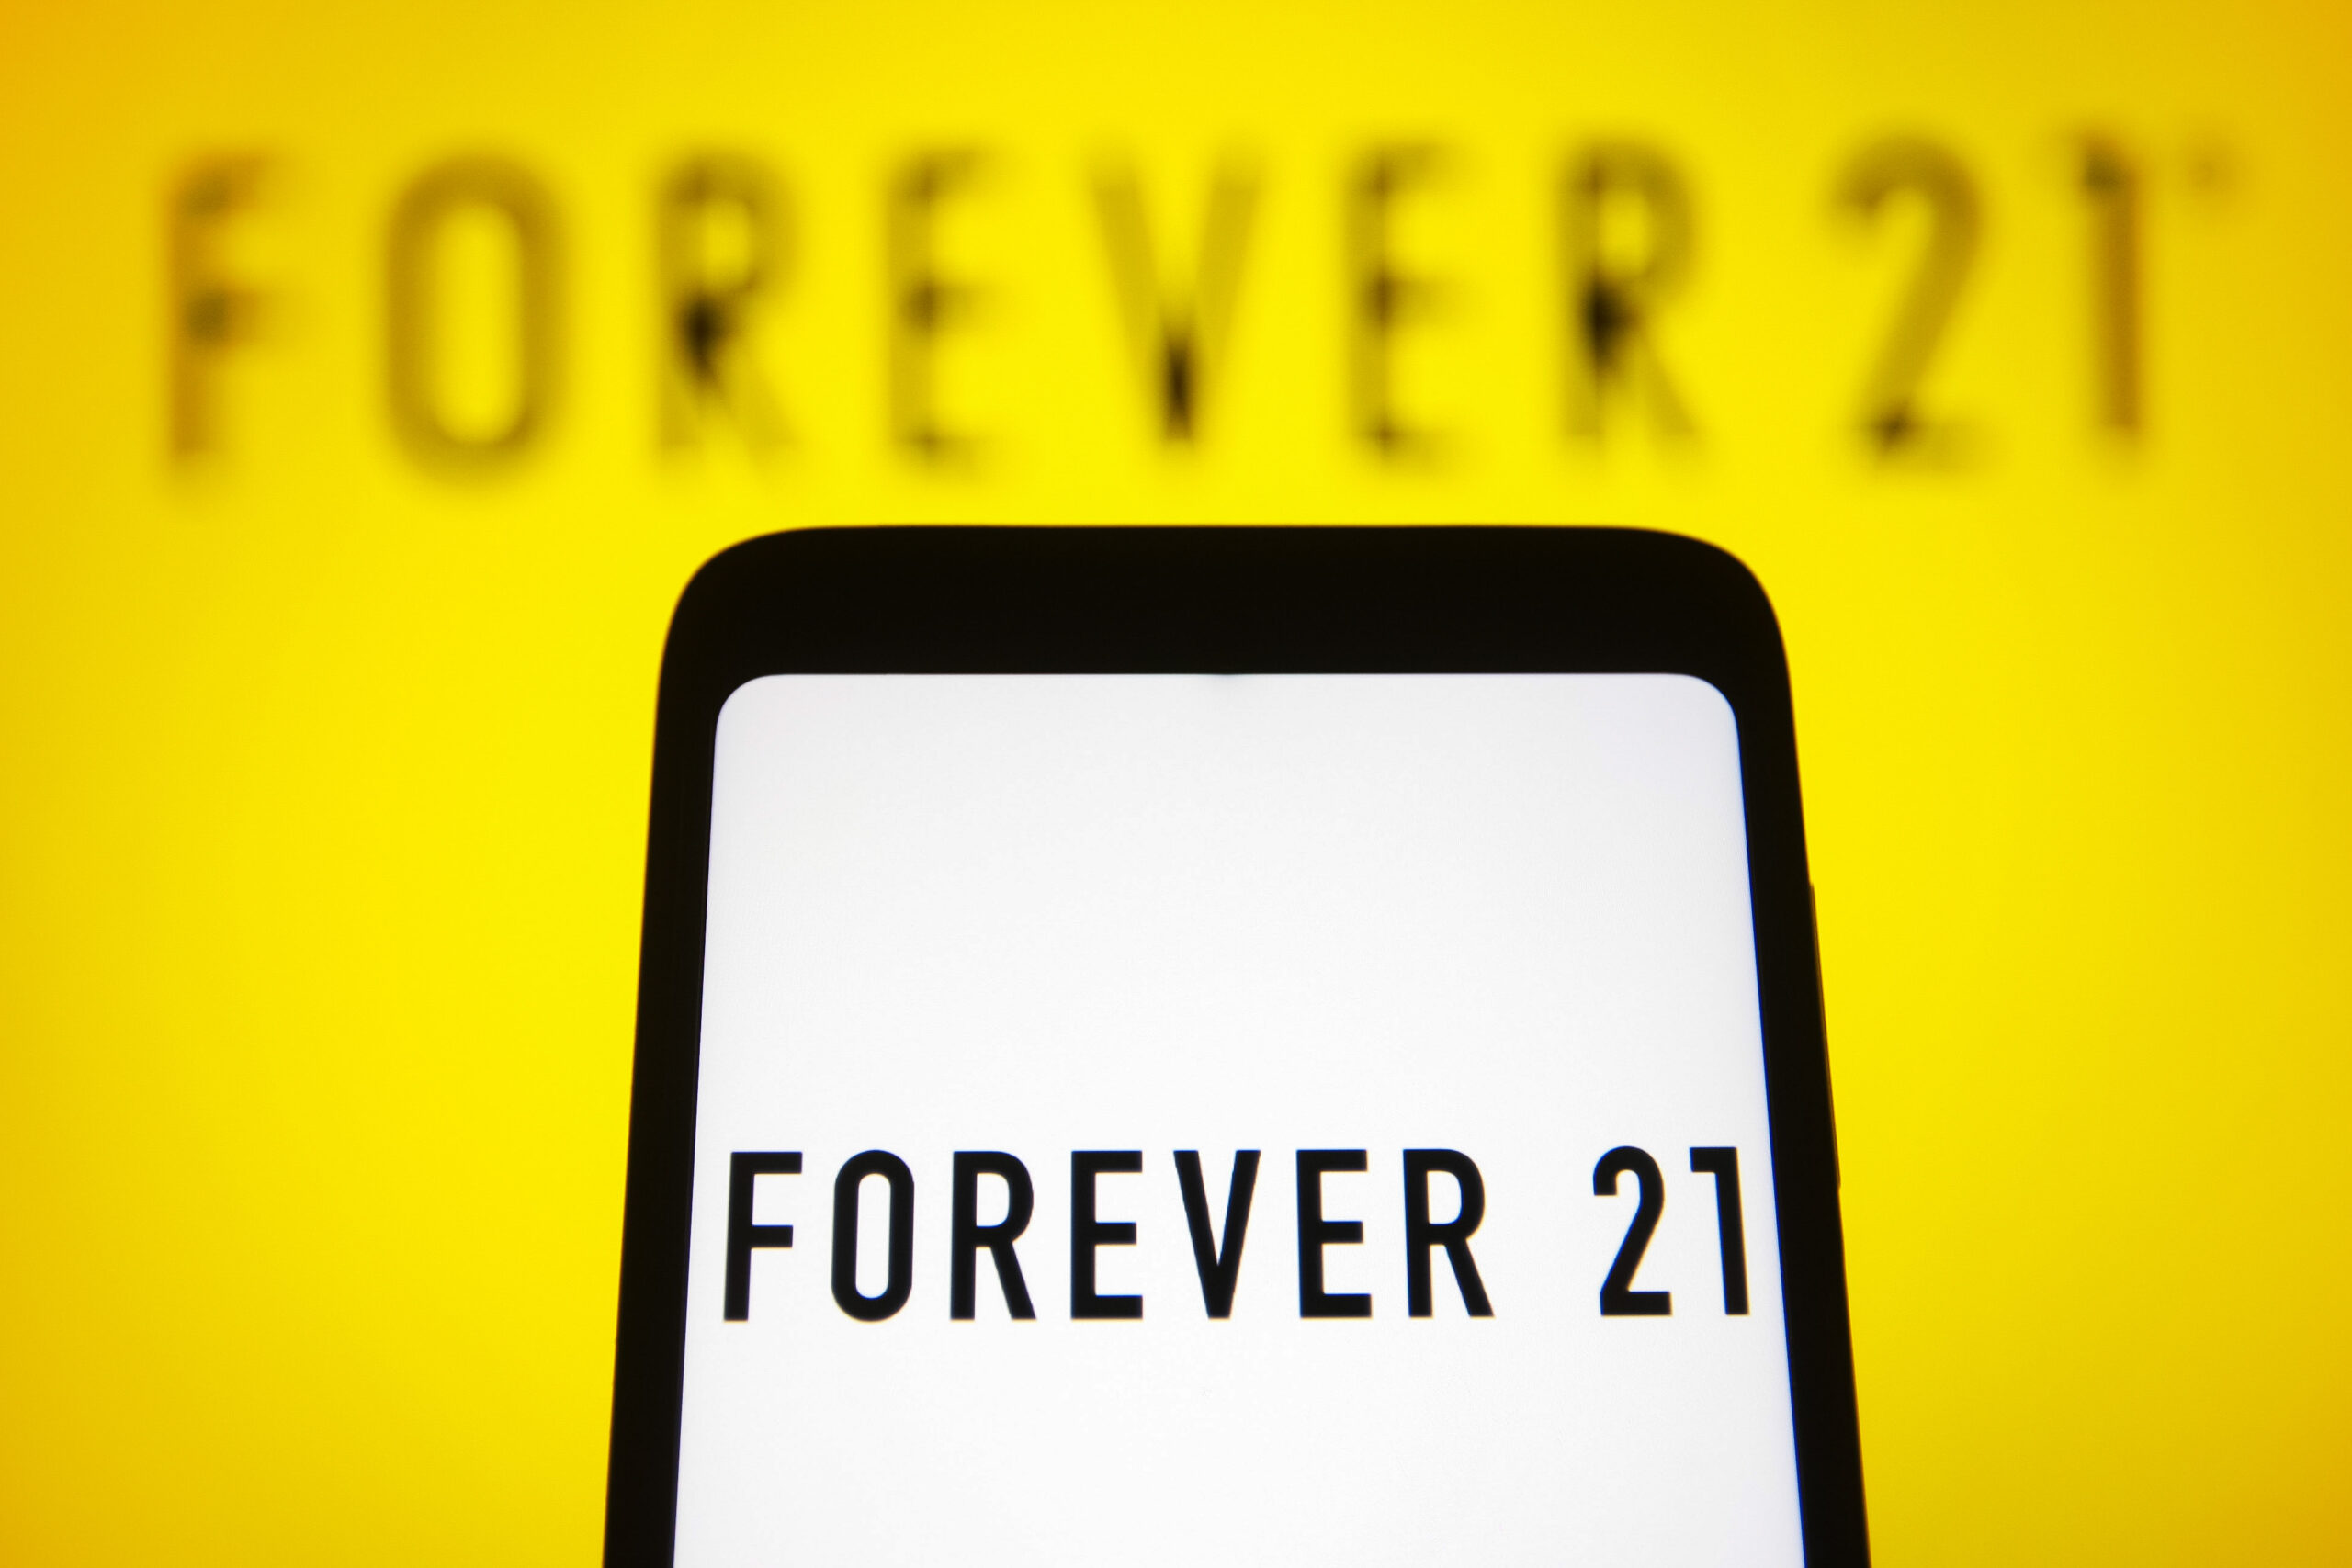 In this photo illustration, logo of Forever 21, a fast fashion retailer is seen on a smartphone and in the background.